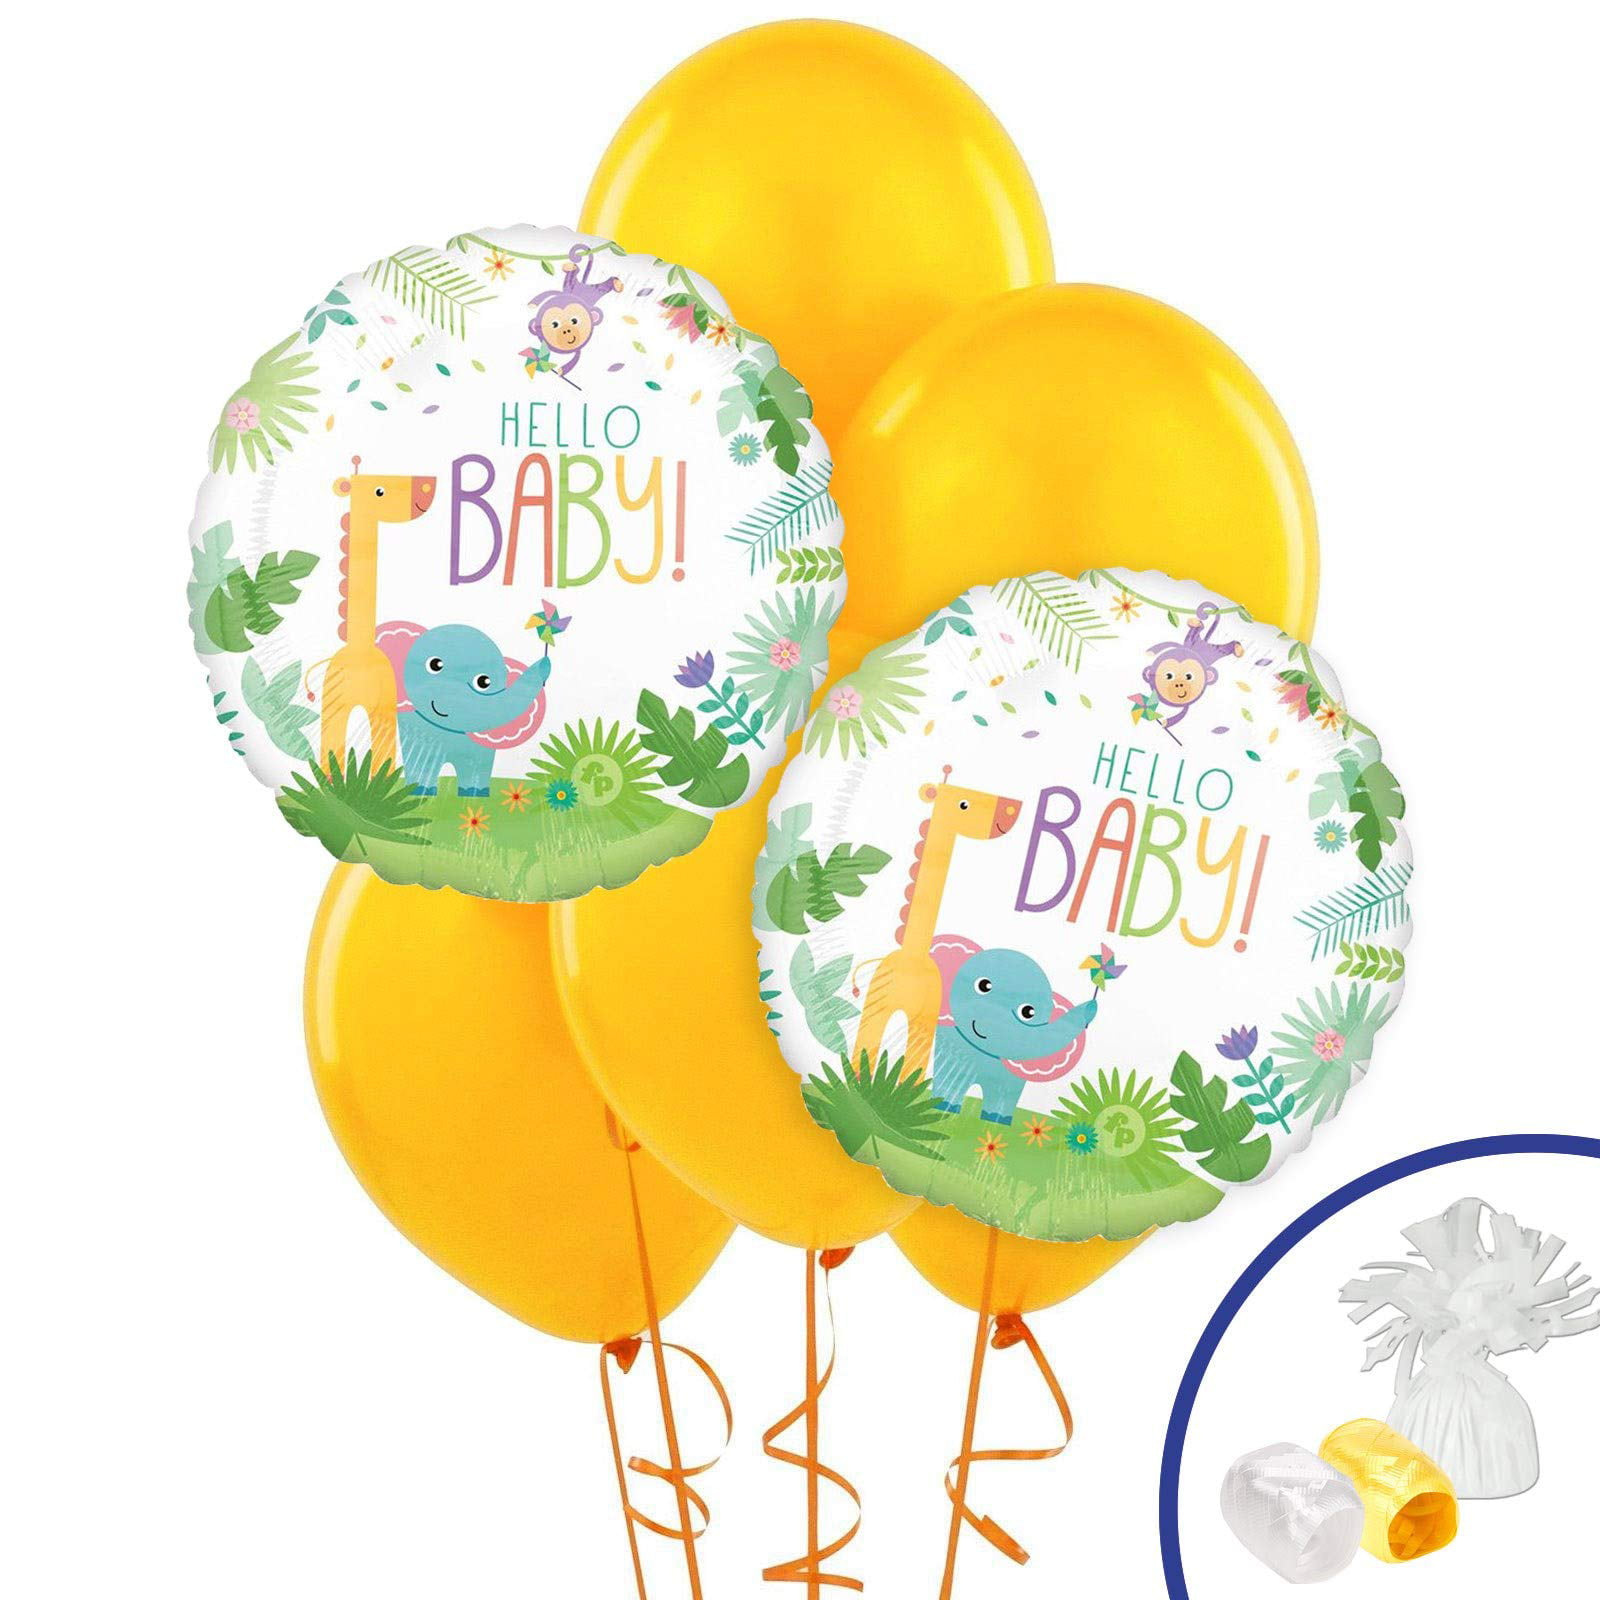 Details about   18pcs Vehicle Balloons 32'' Number Foil Balloon Children Birthday Party Decor 